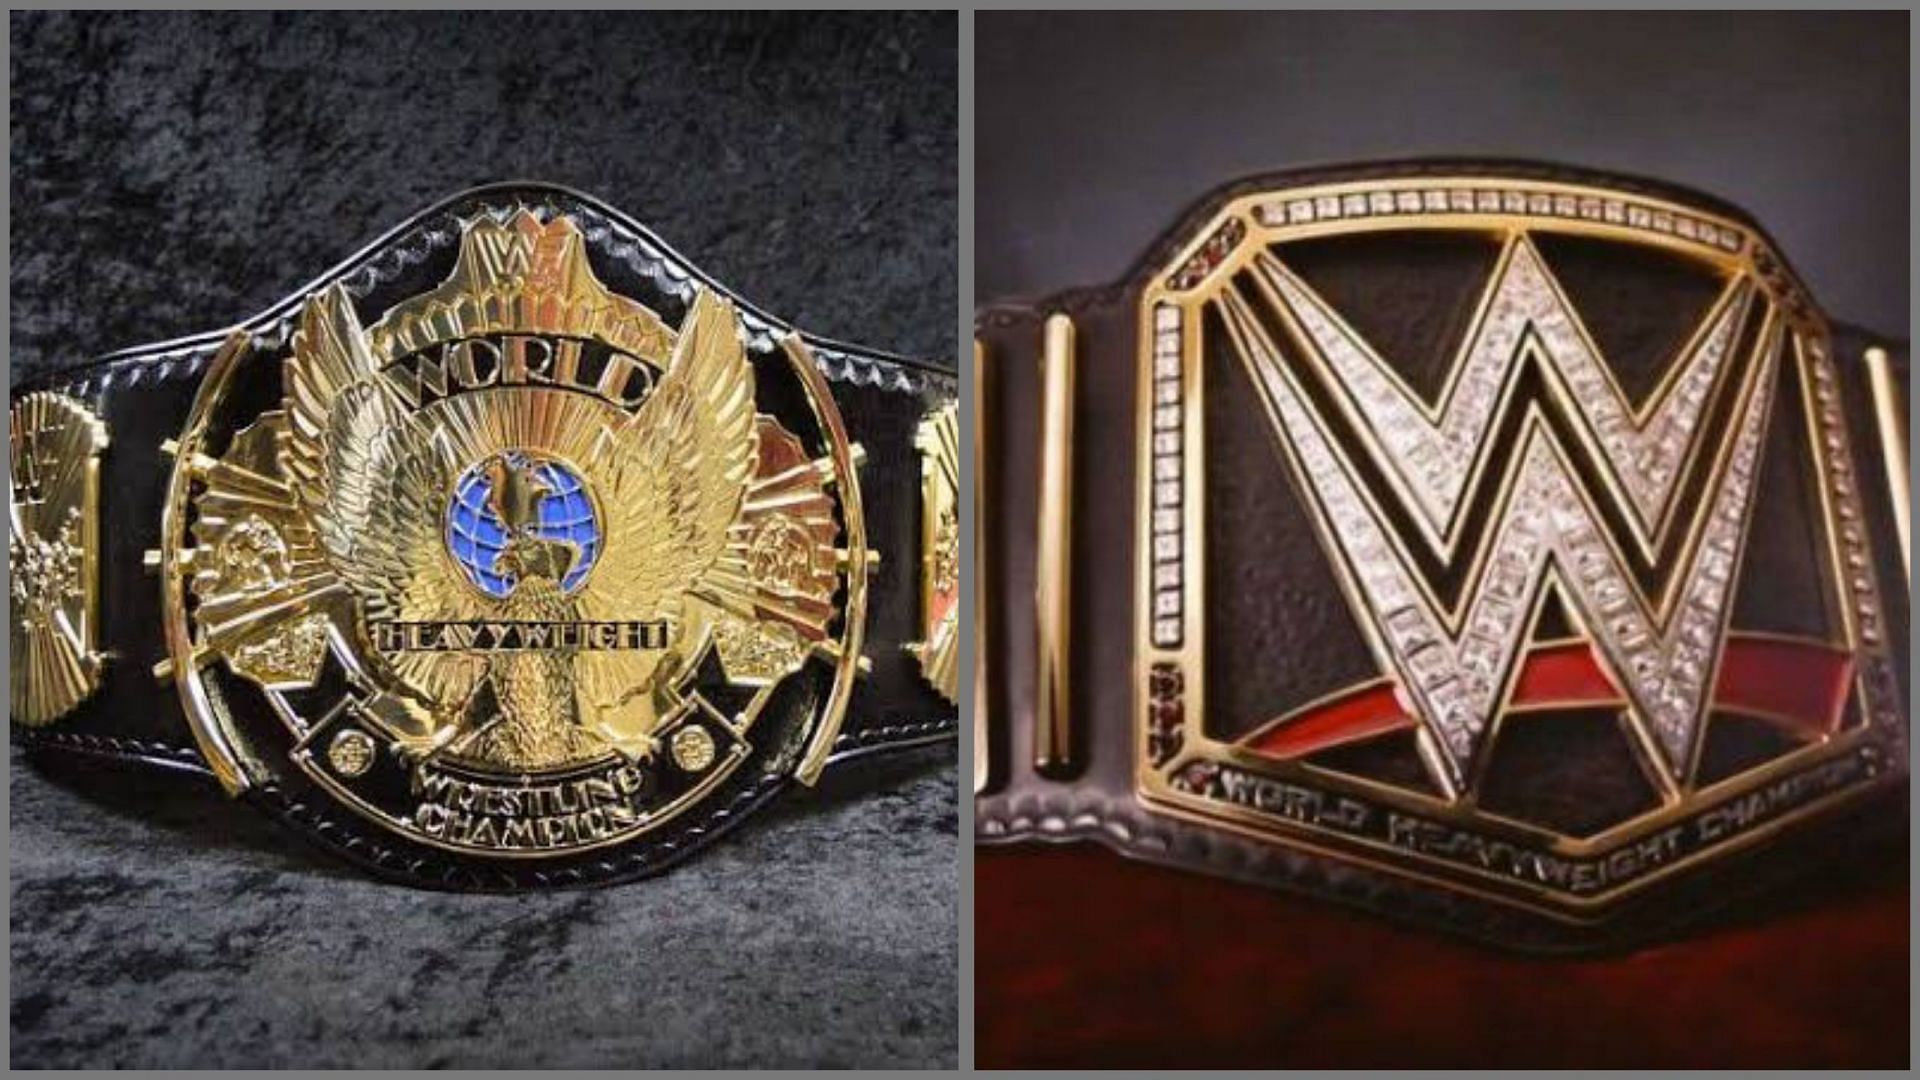 The World Championship is the most coveted prize in professional wrestling